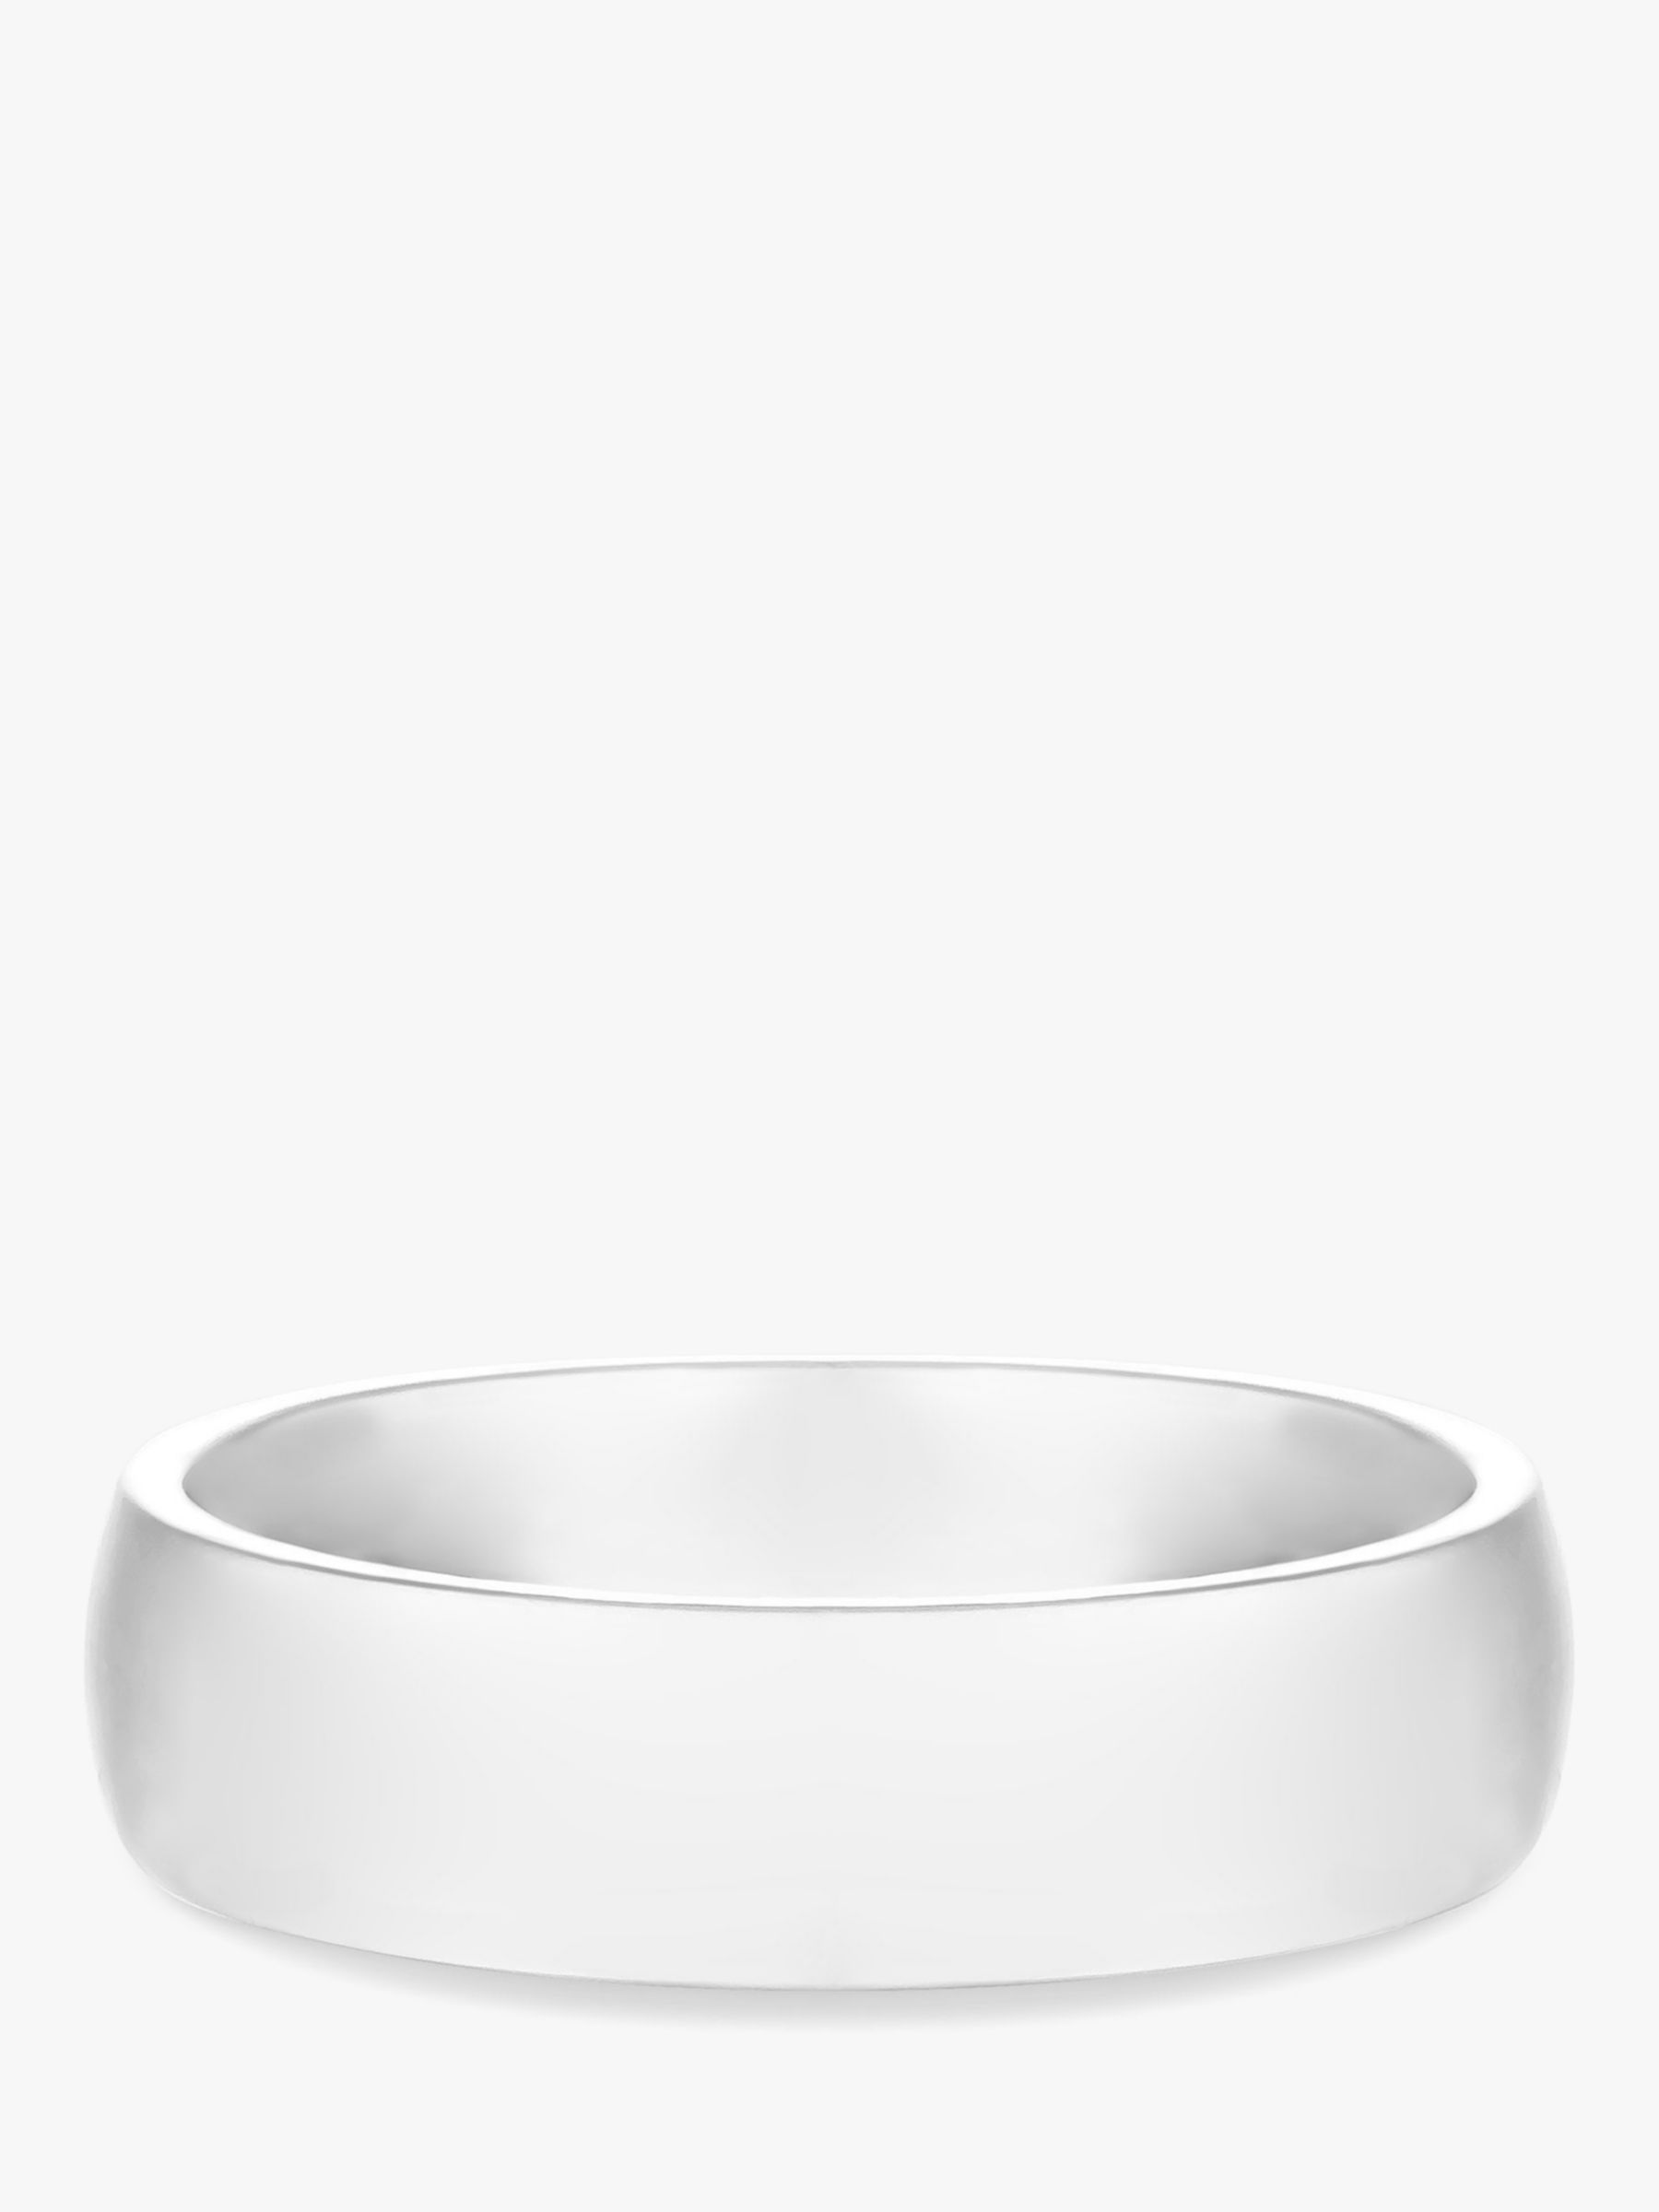 Buy Simply Silver Polished Sterling Silver Wedding Band, Silver Online at johnlewis.com